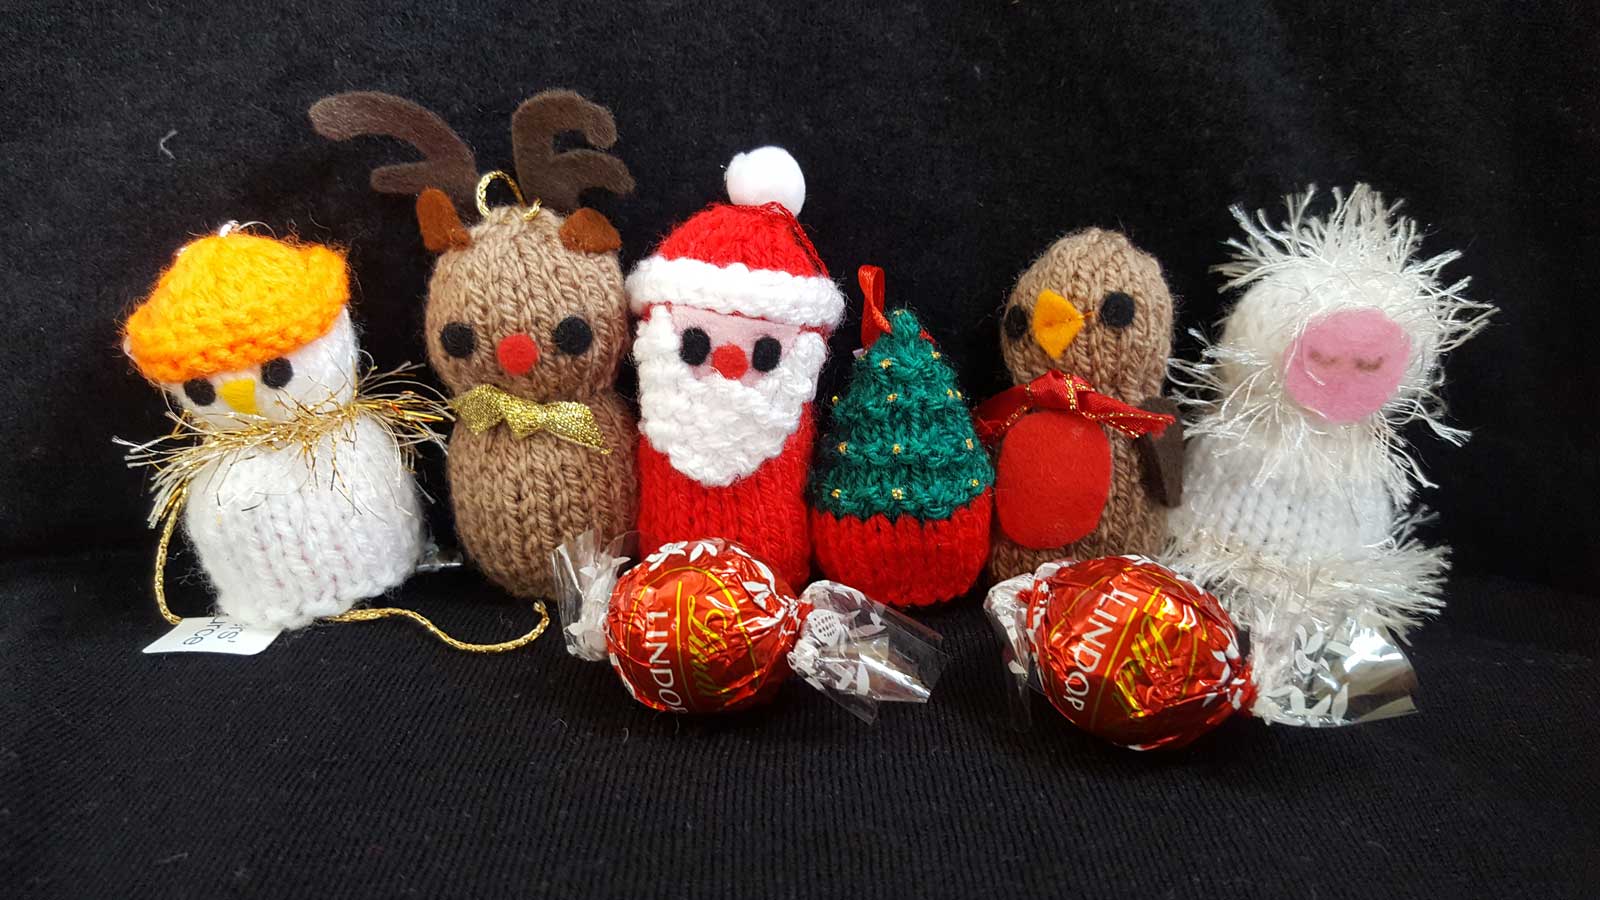 The knitted Christmas decorations